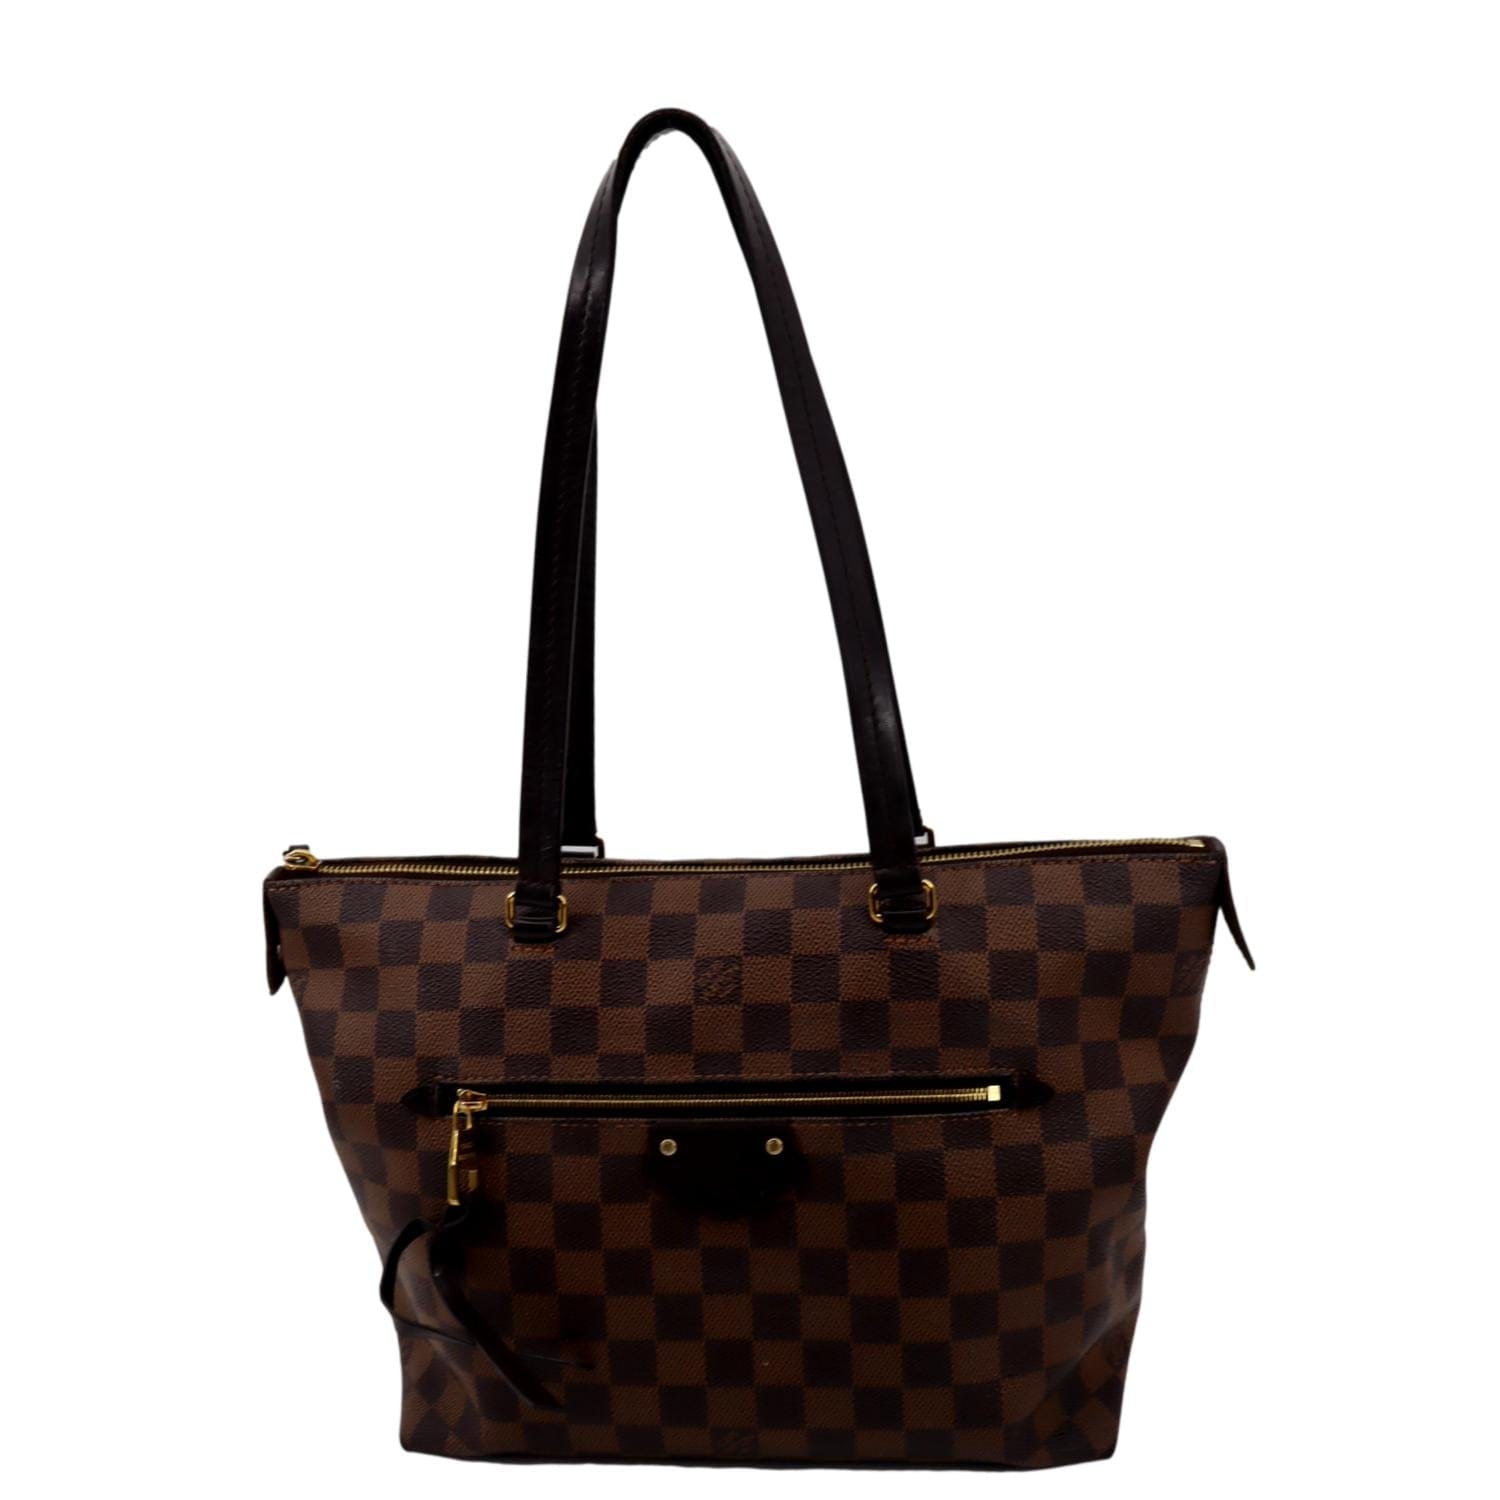 NEW! 2017 Louis Vuitton Damier Ebene Canvas Neverfull PM Tote